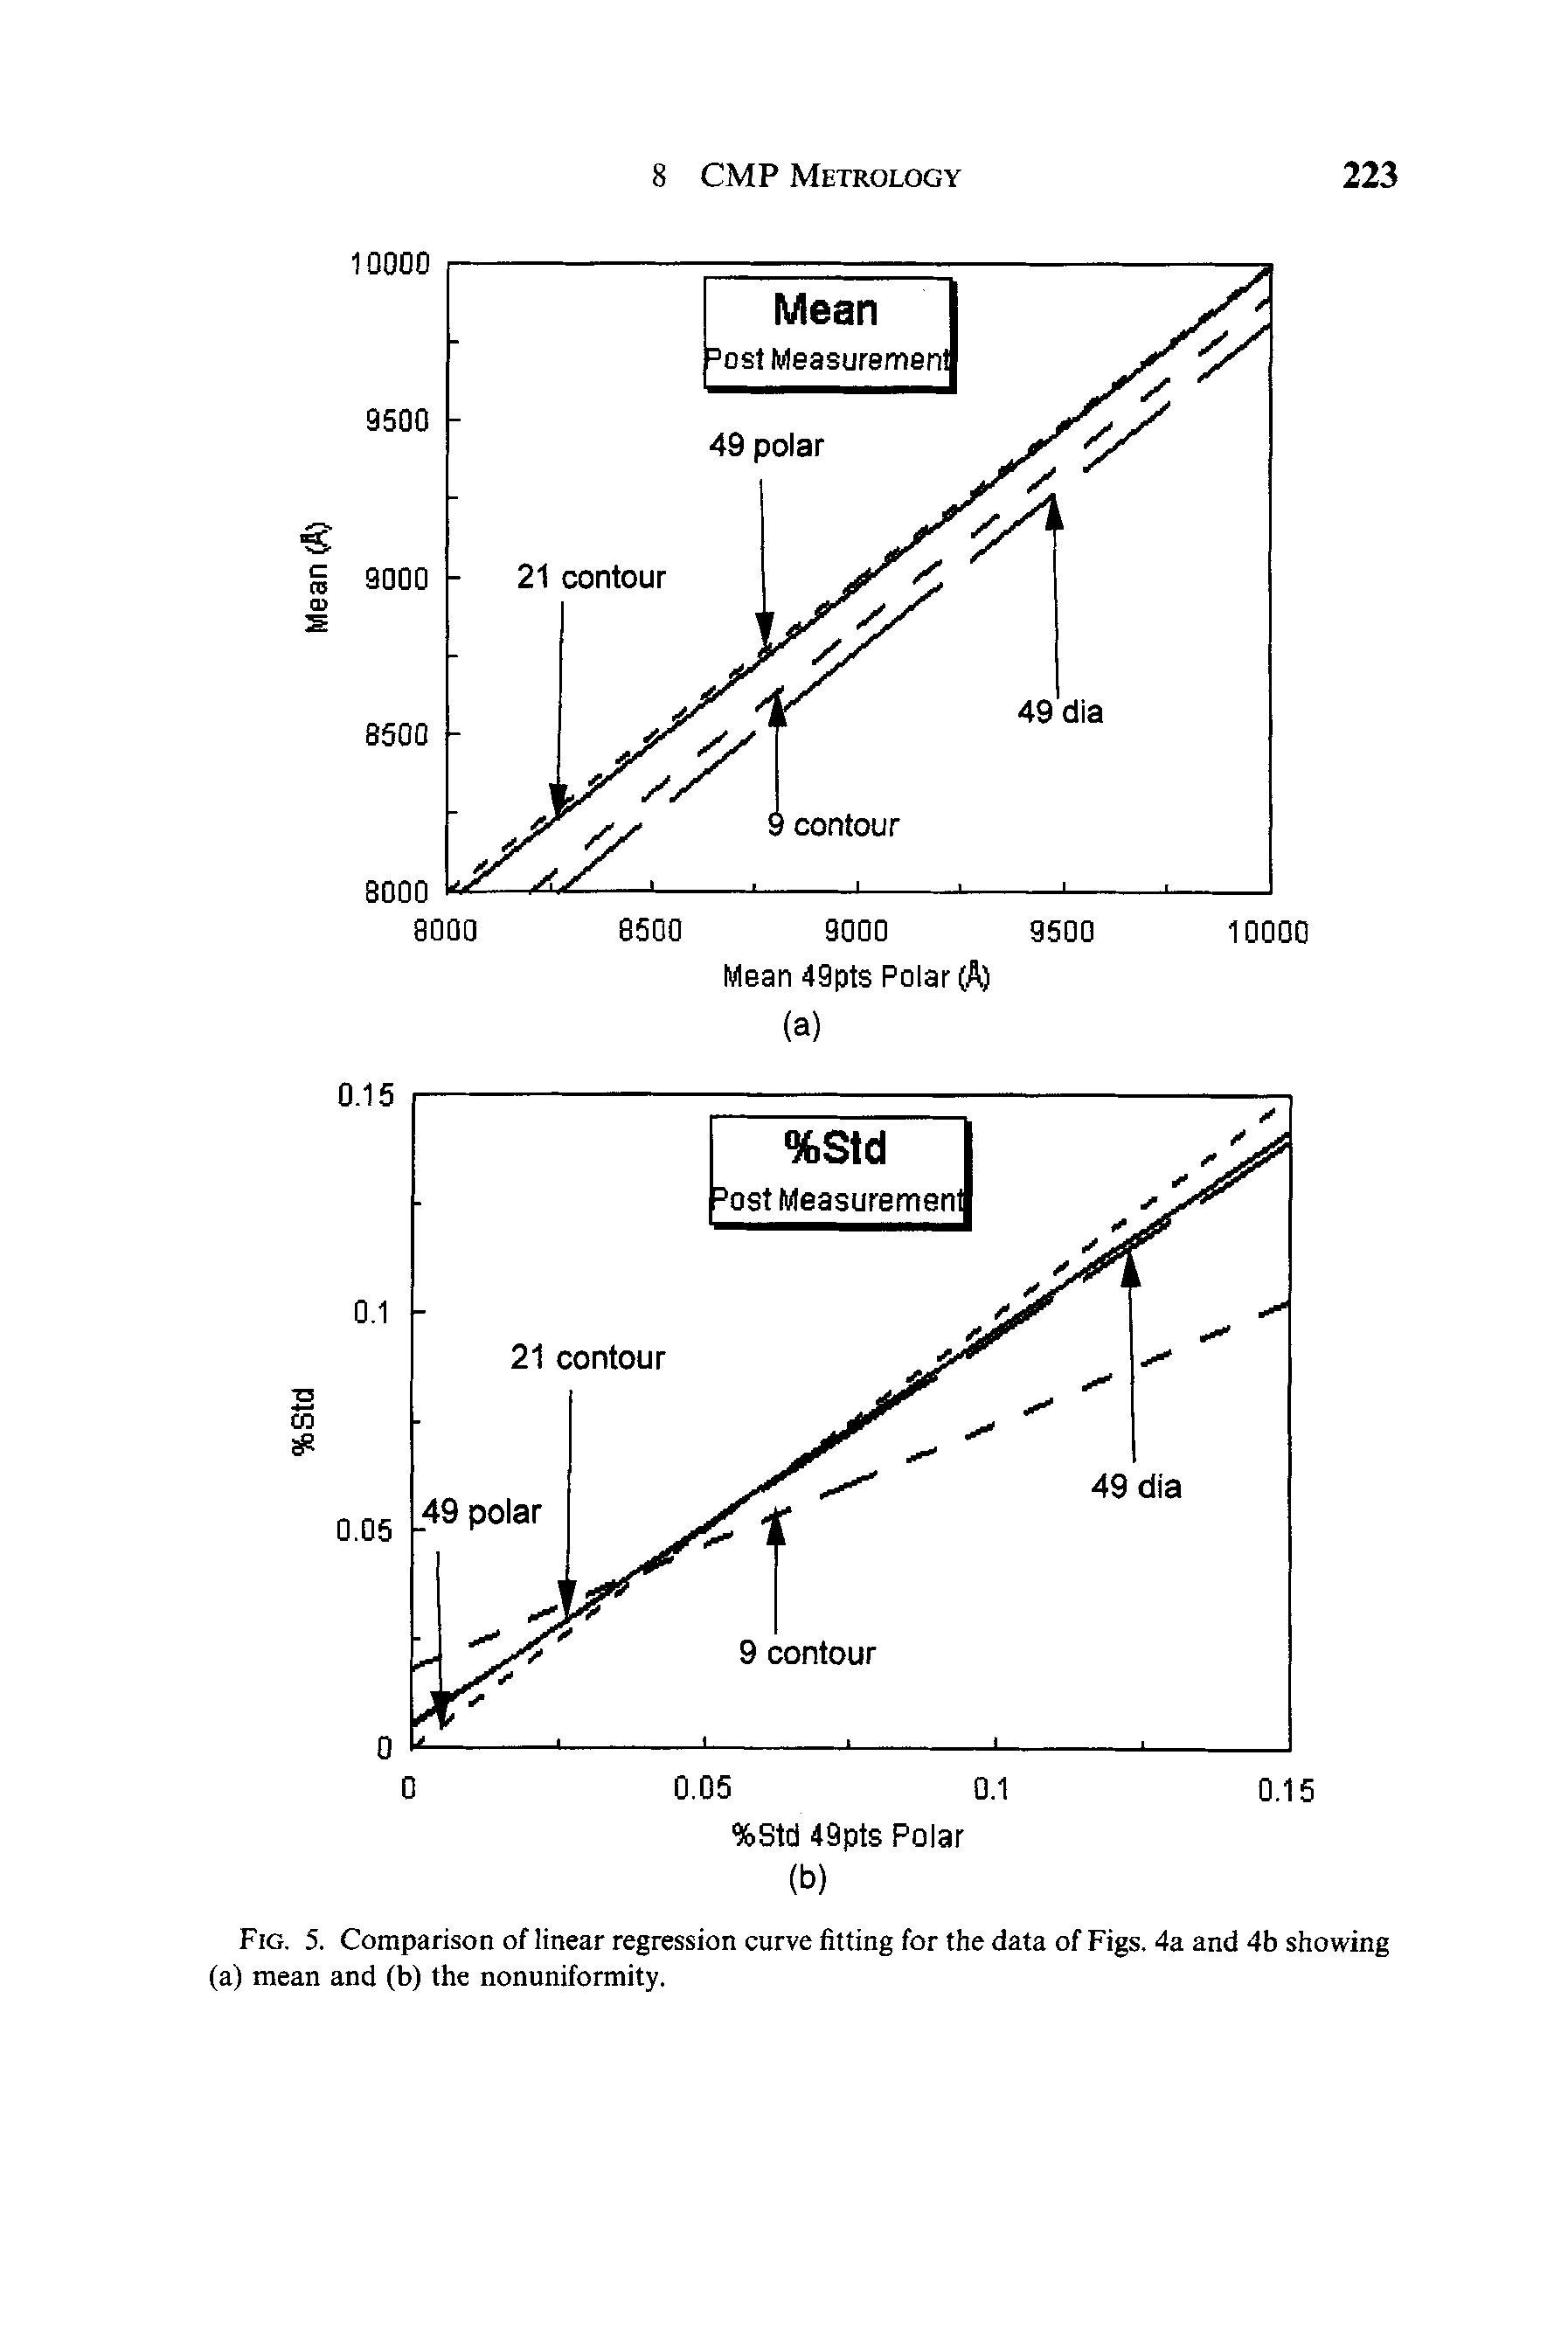 Fig. 5. Comparison of linear regression curve fitting for the data of Figs. 4a and 4b showing (a) mean and (b) the nonuniformity.